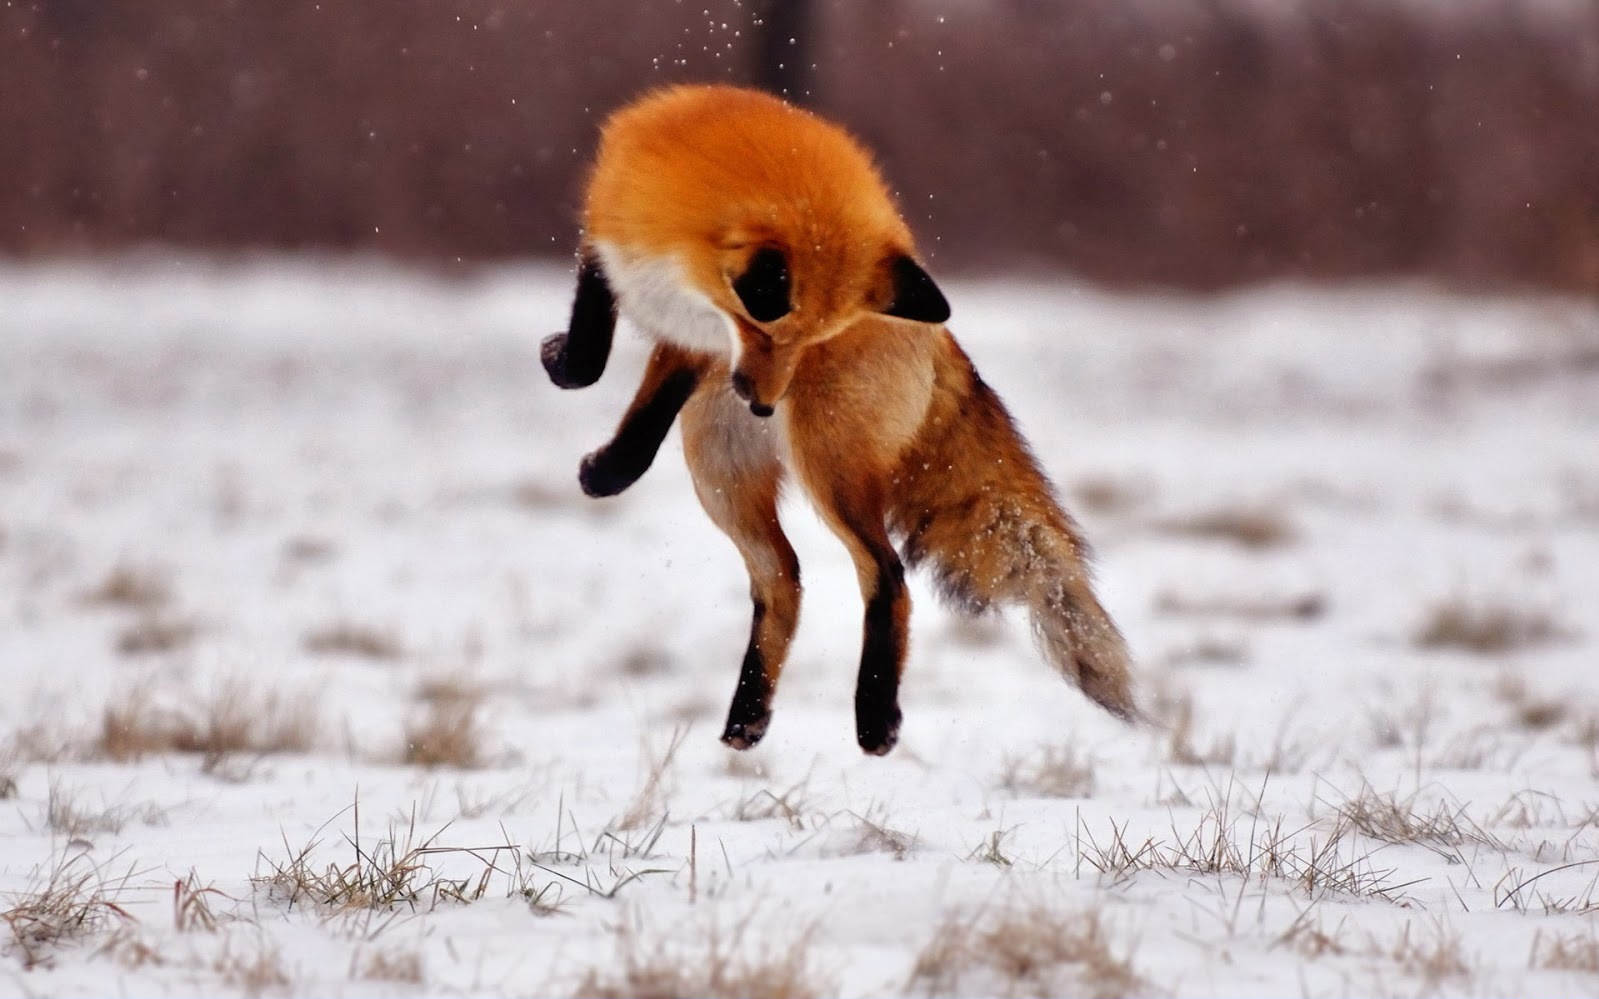 Fox photos on the hunt in winter